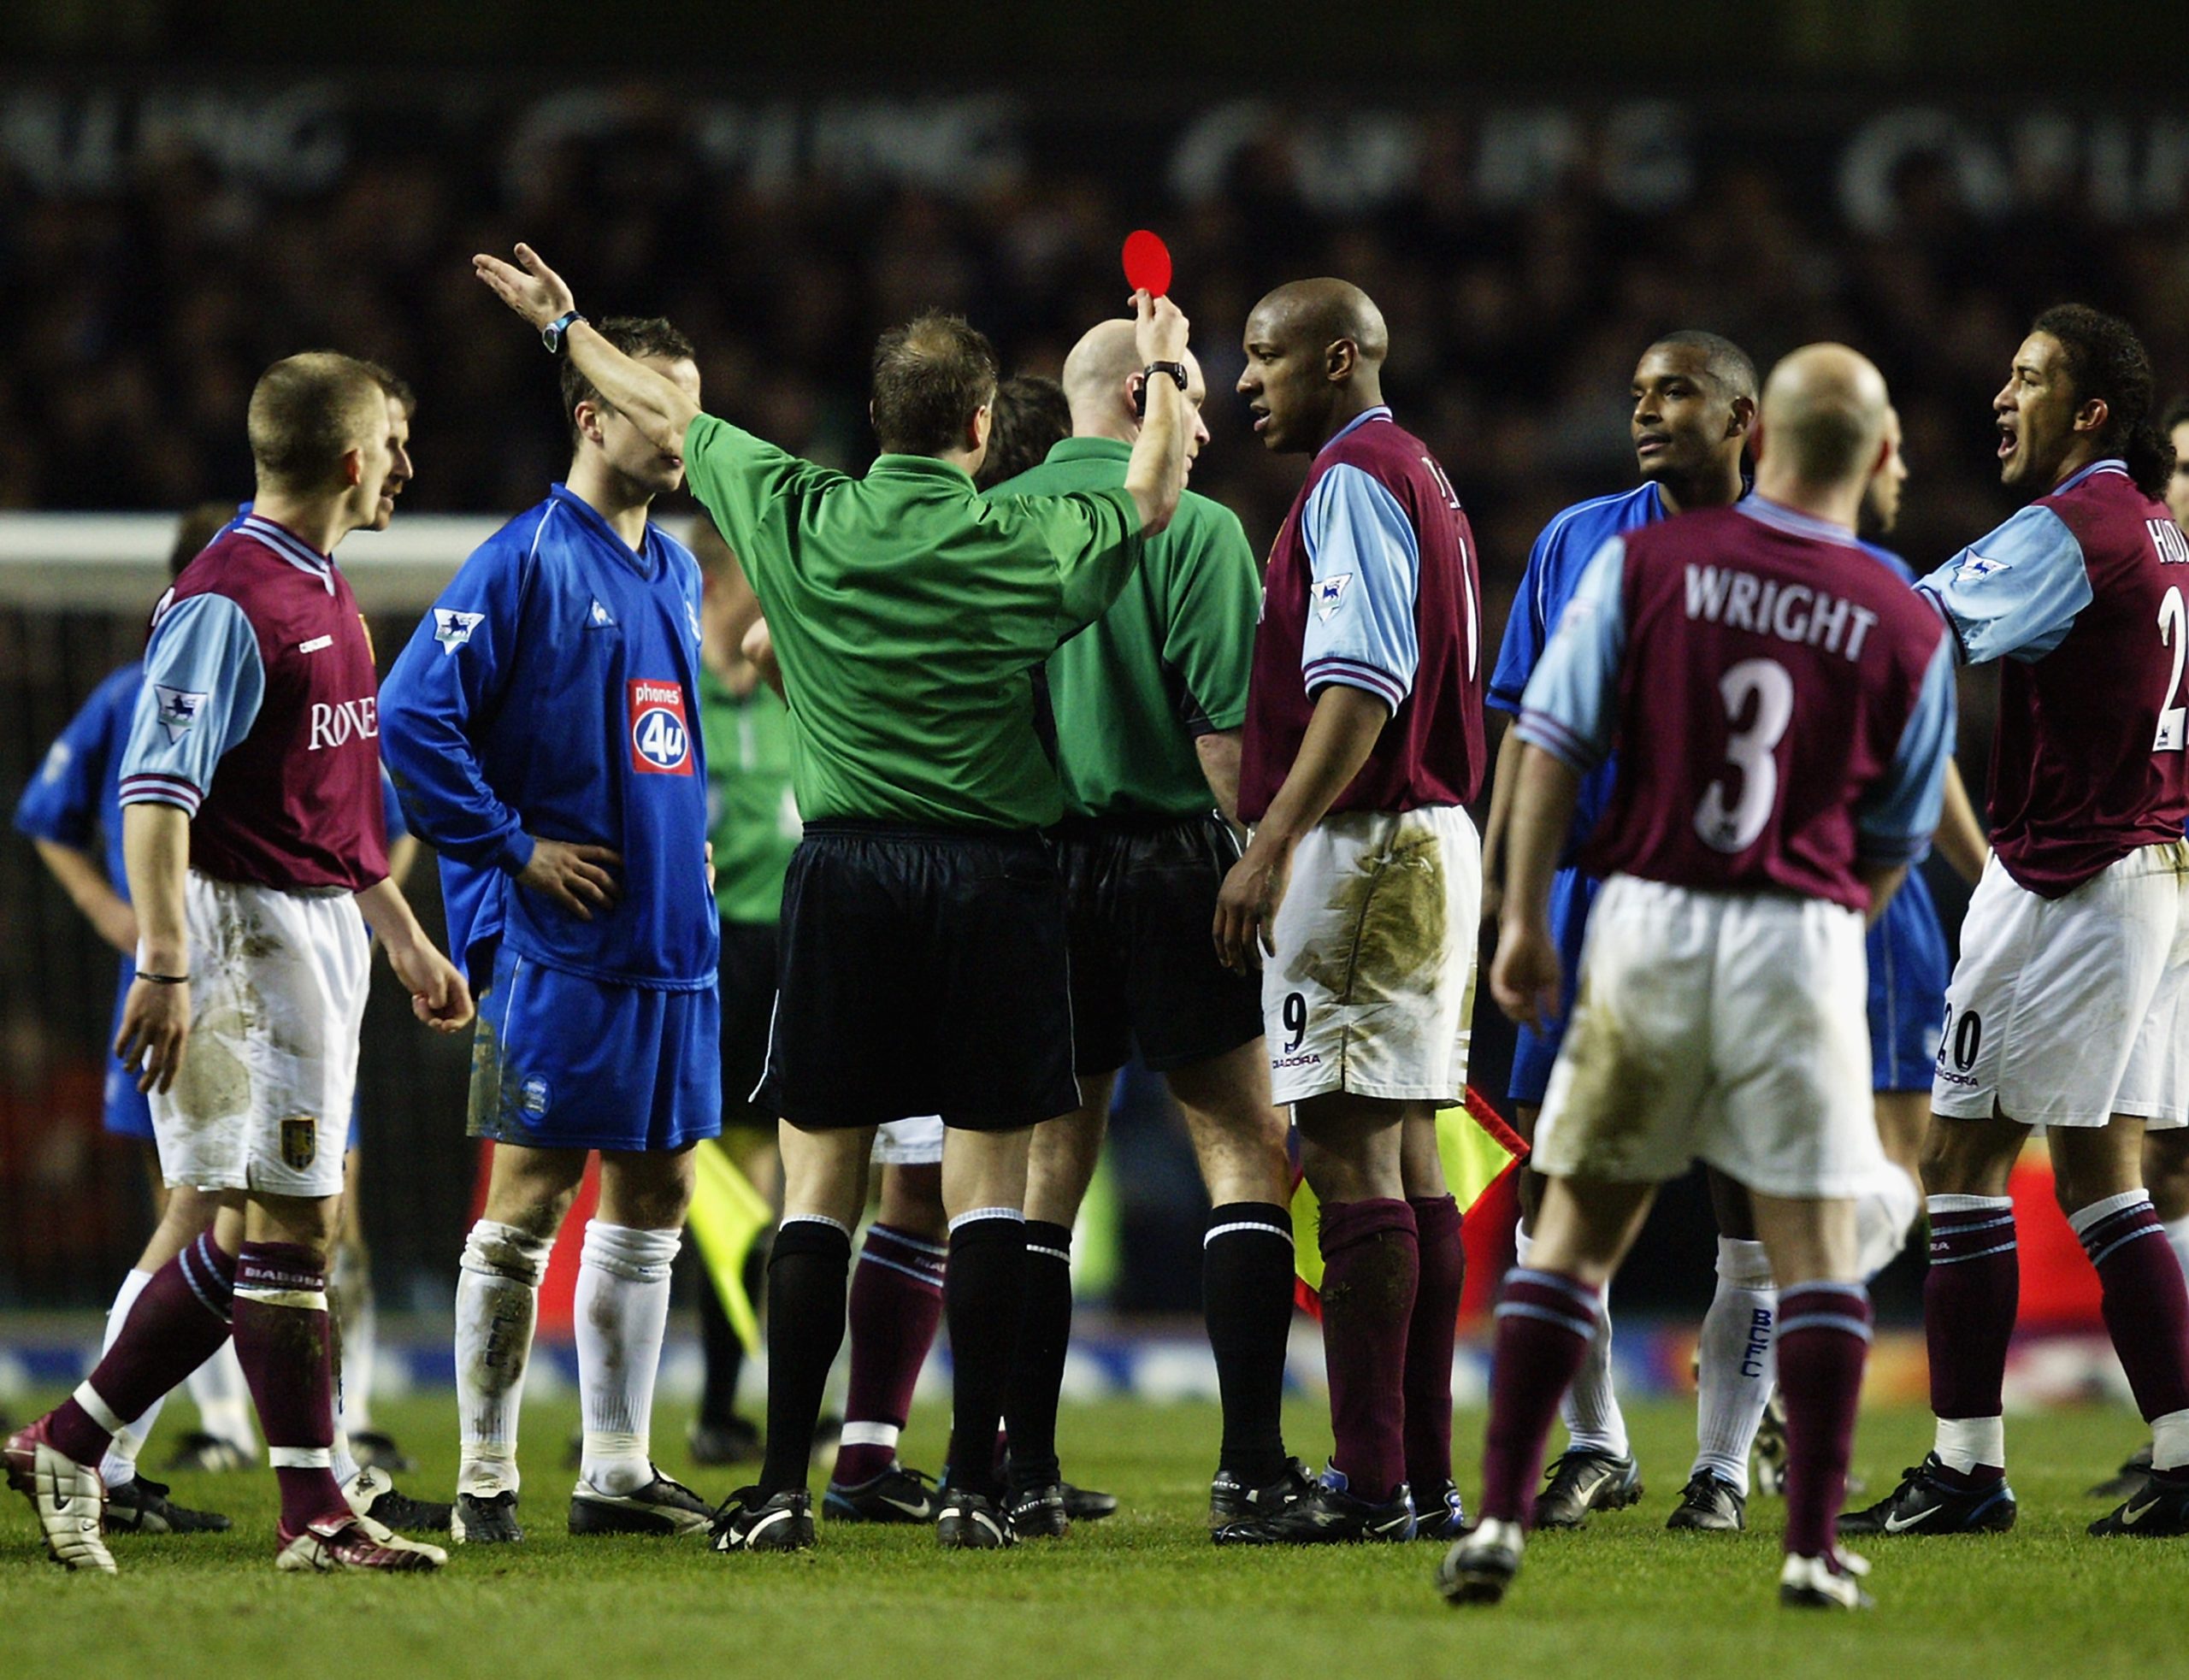 Dion Dublin of Aston Villa is shown the red card by referee Mark Halsey for head butting Robbie Savage of Birmingham City during the FA Barclaycard Premiership match held on March 3, 2003 at Villa Park.